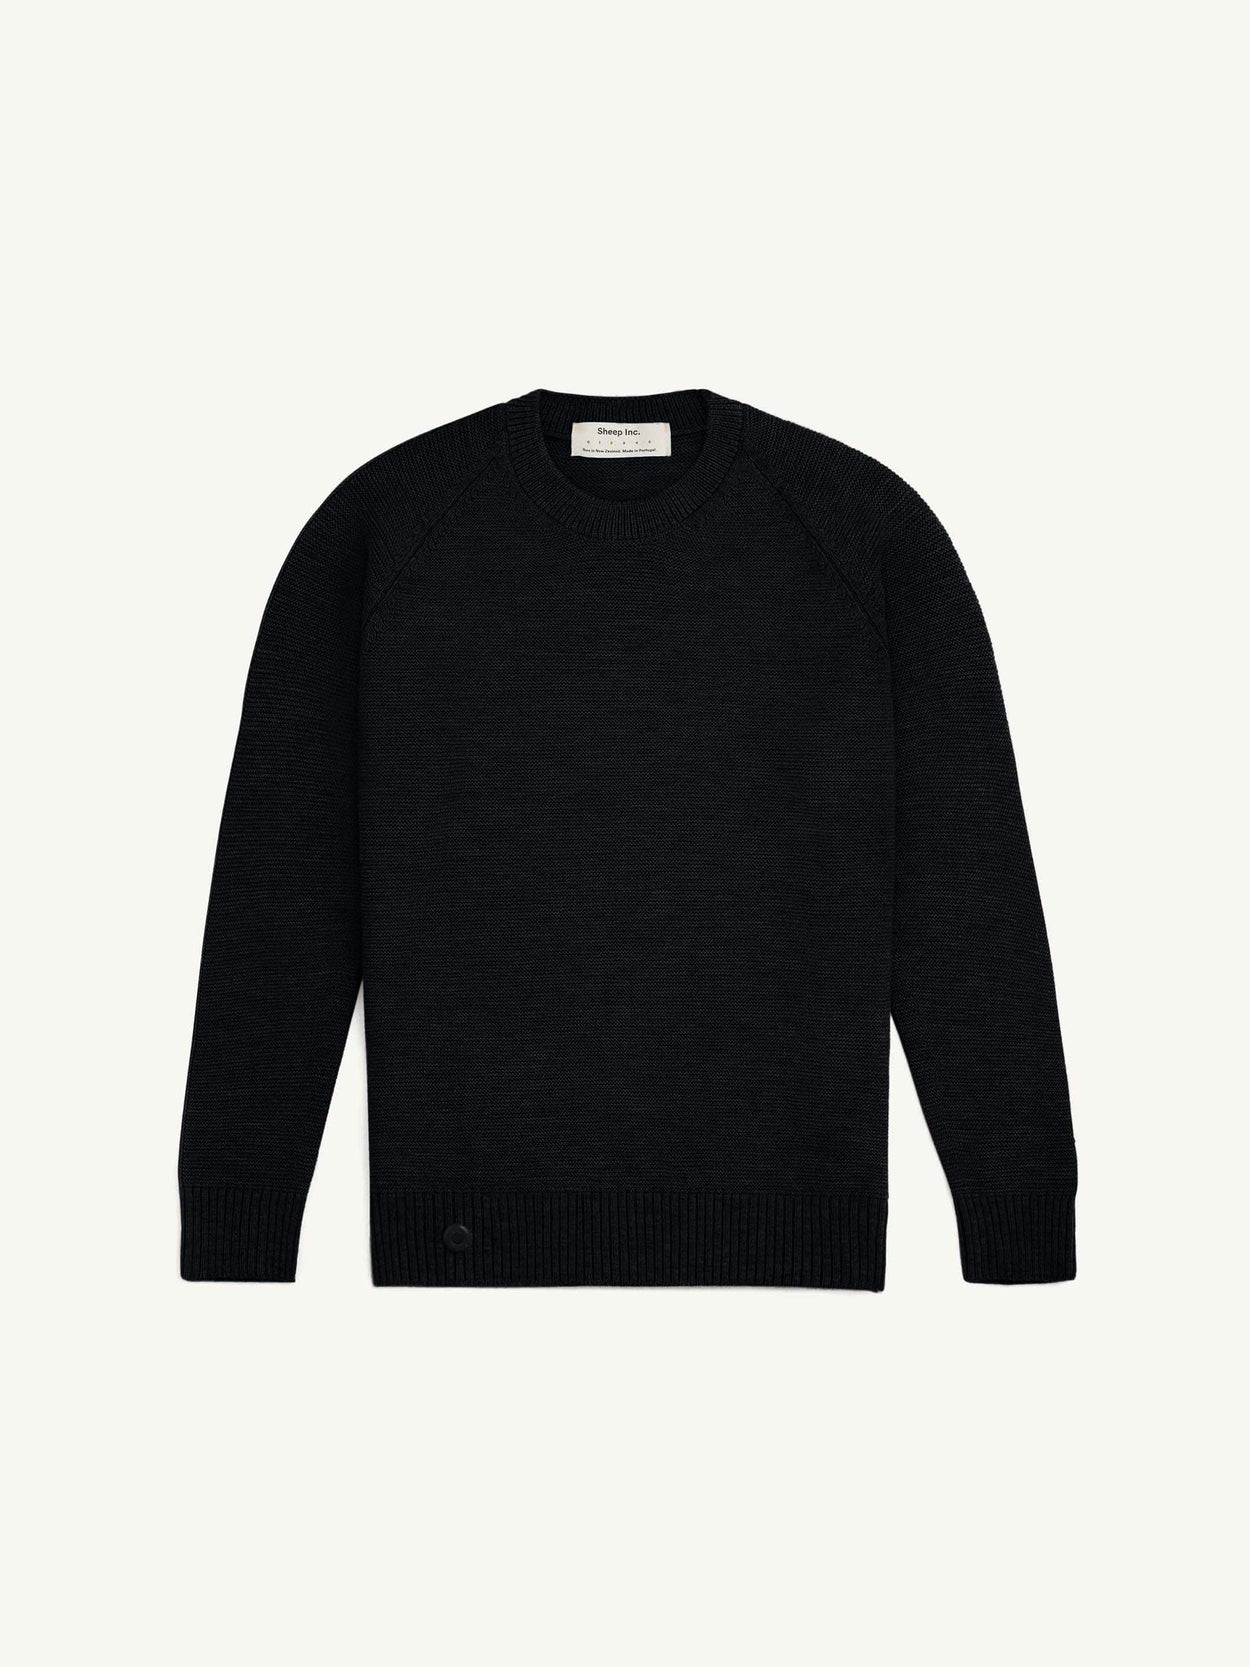 back to the basics  cashmere crewneck - Style At A Certain Age